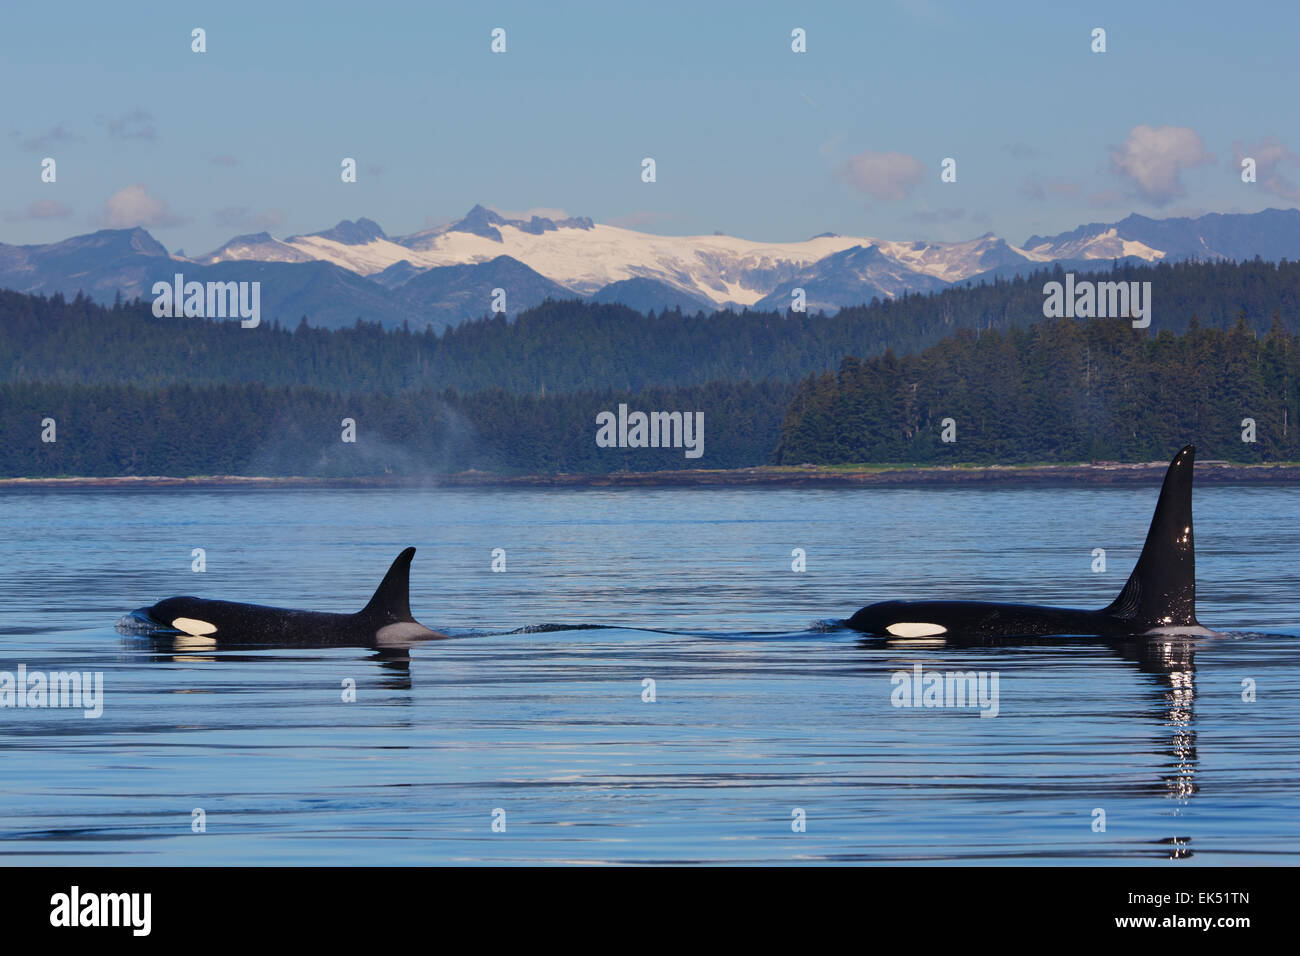 Orcas from the AF5 pod, Frederick Sound, Tongass National Forest, Alaska. Stock Photo